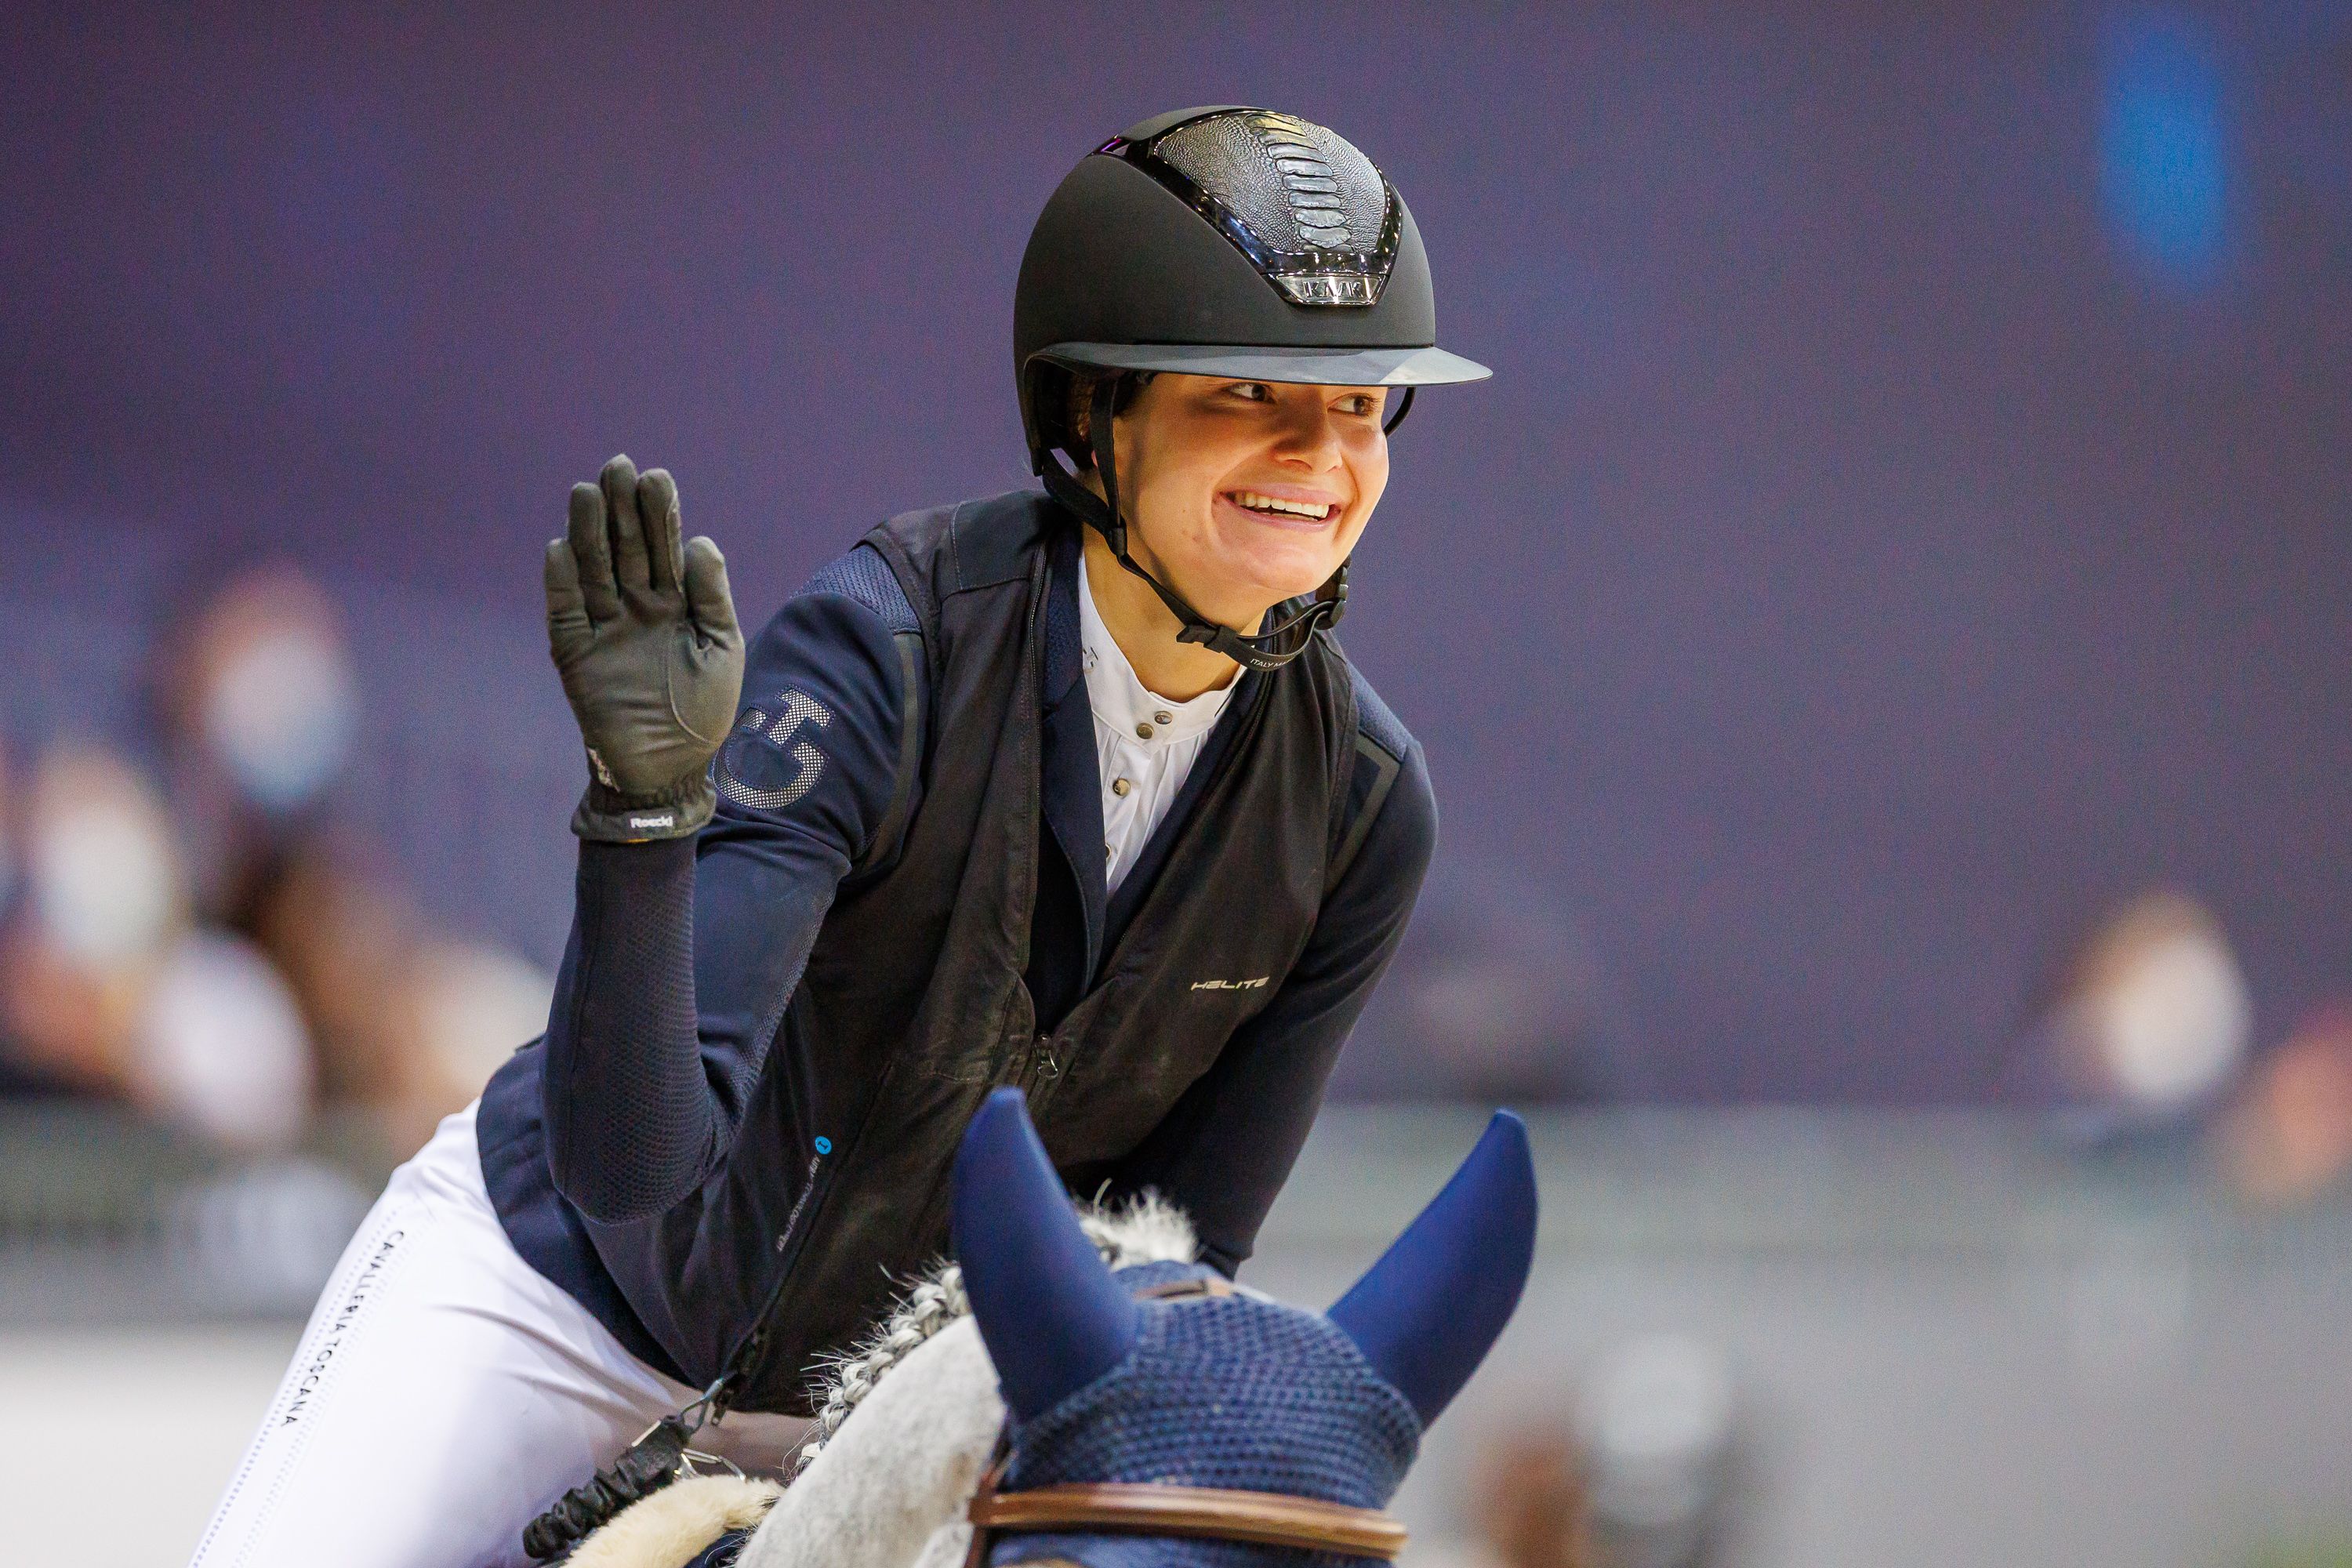 Zoe Conter: "This year my major goal is to win a CSI5* Grand Prix."